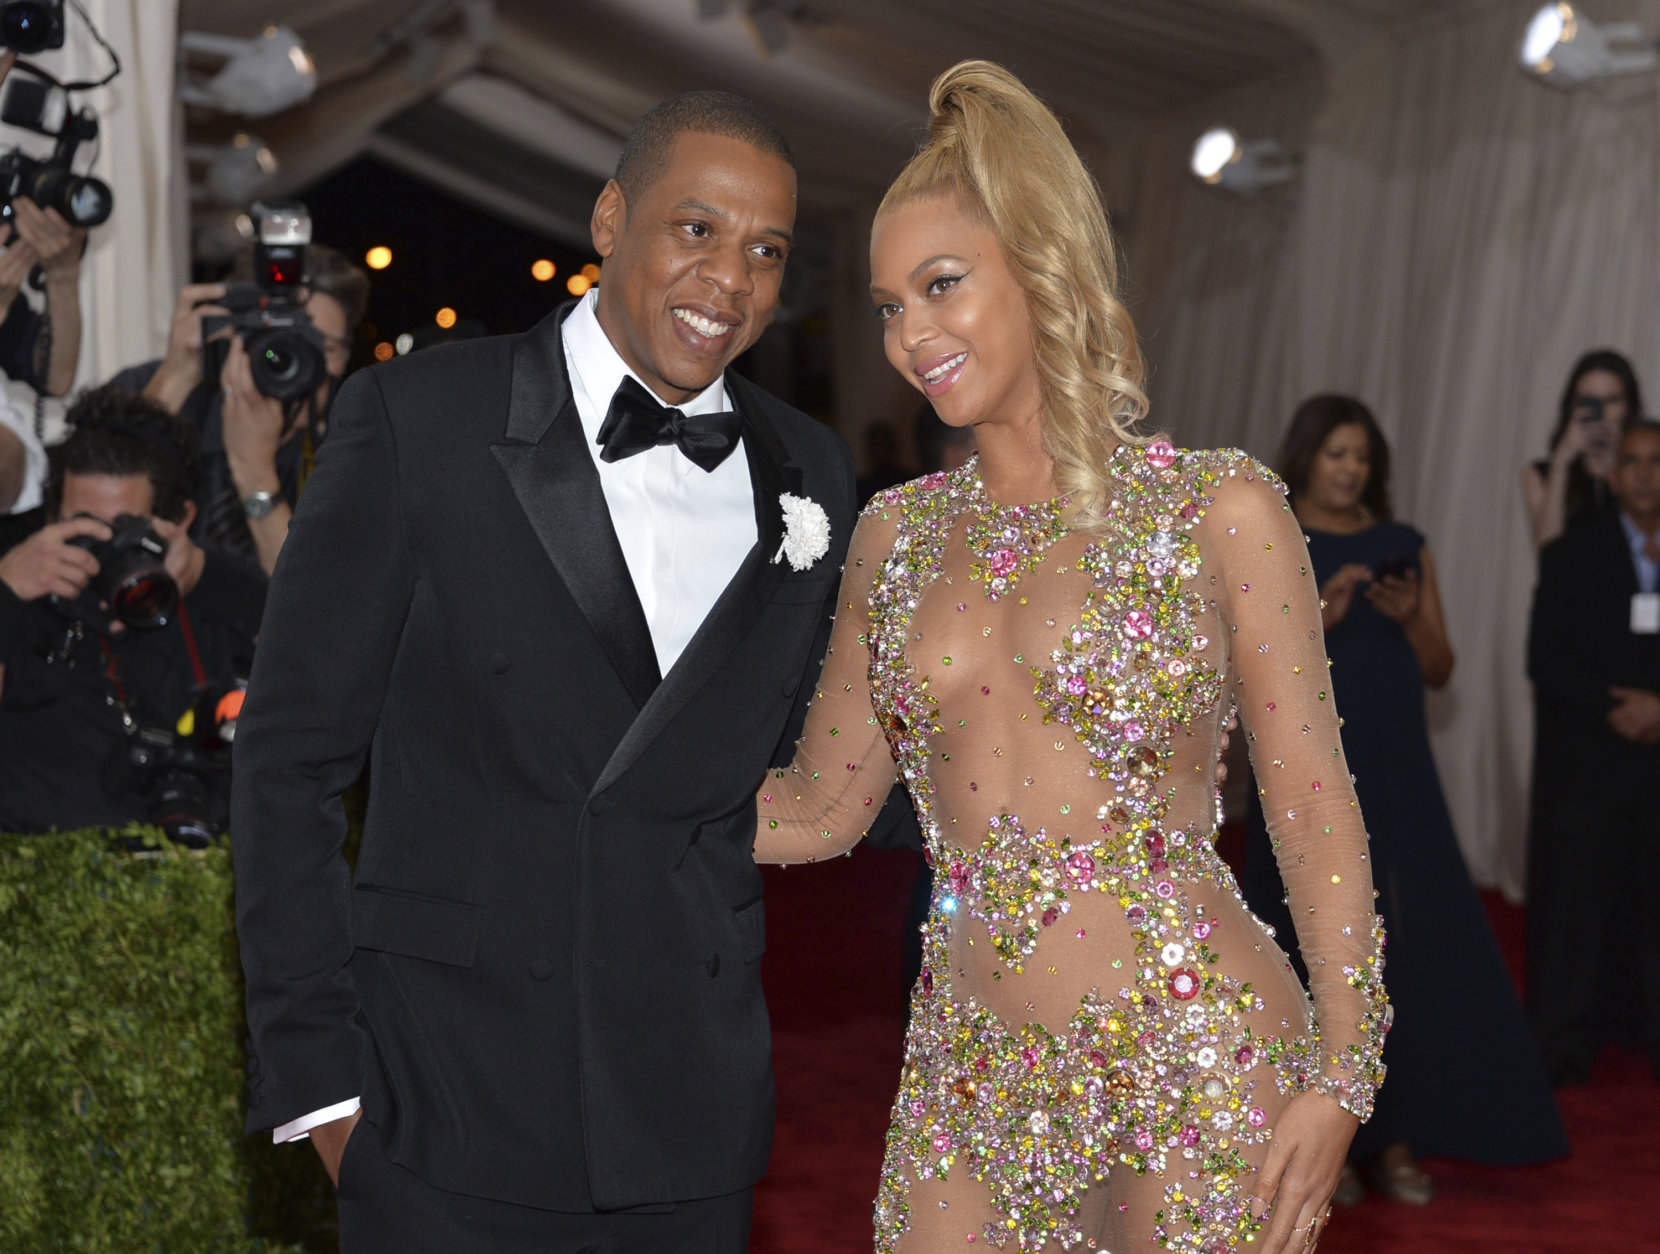 File - In this May 4, 2015, file photo, Jay Z, left, and Beyonce arrive at The Metropolitan Museum of Art's Costume Institute benefit gala celebrating "China: Through the Looking Glass" in New York. The couple dressed as Barbie and Ken for Halloween in photos posted on Instagram Nov. 1, 2016. (Photo by Evan Agostini/Invision/AP, File)